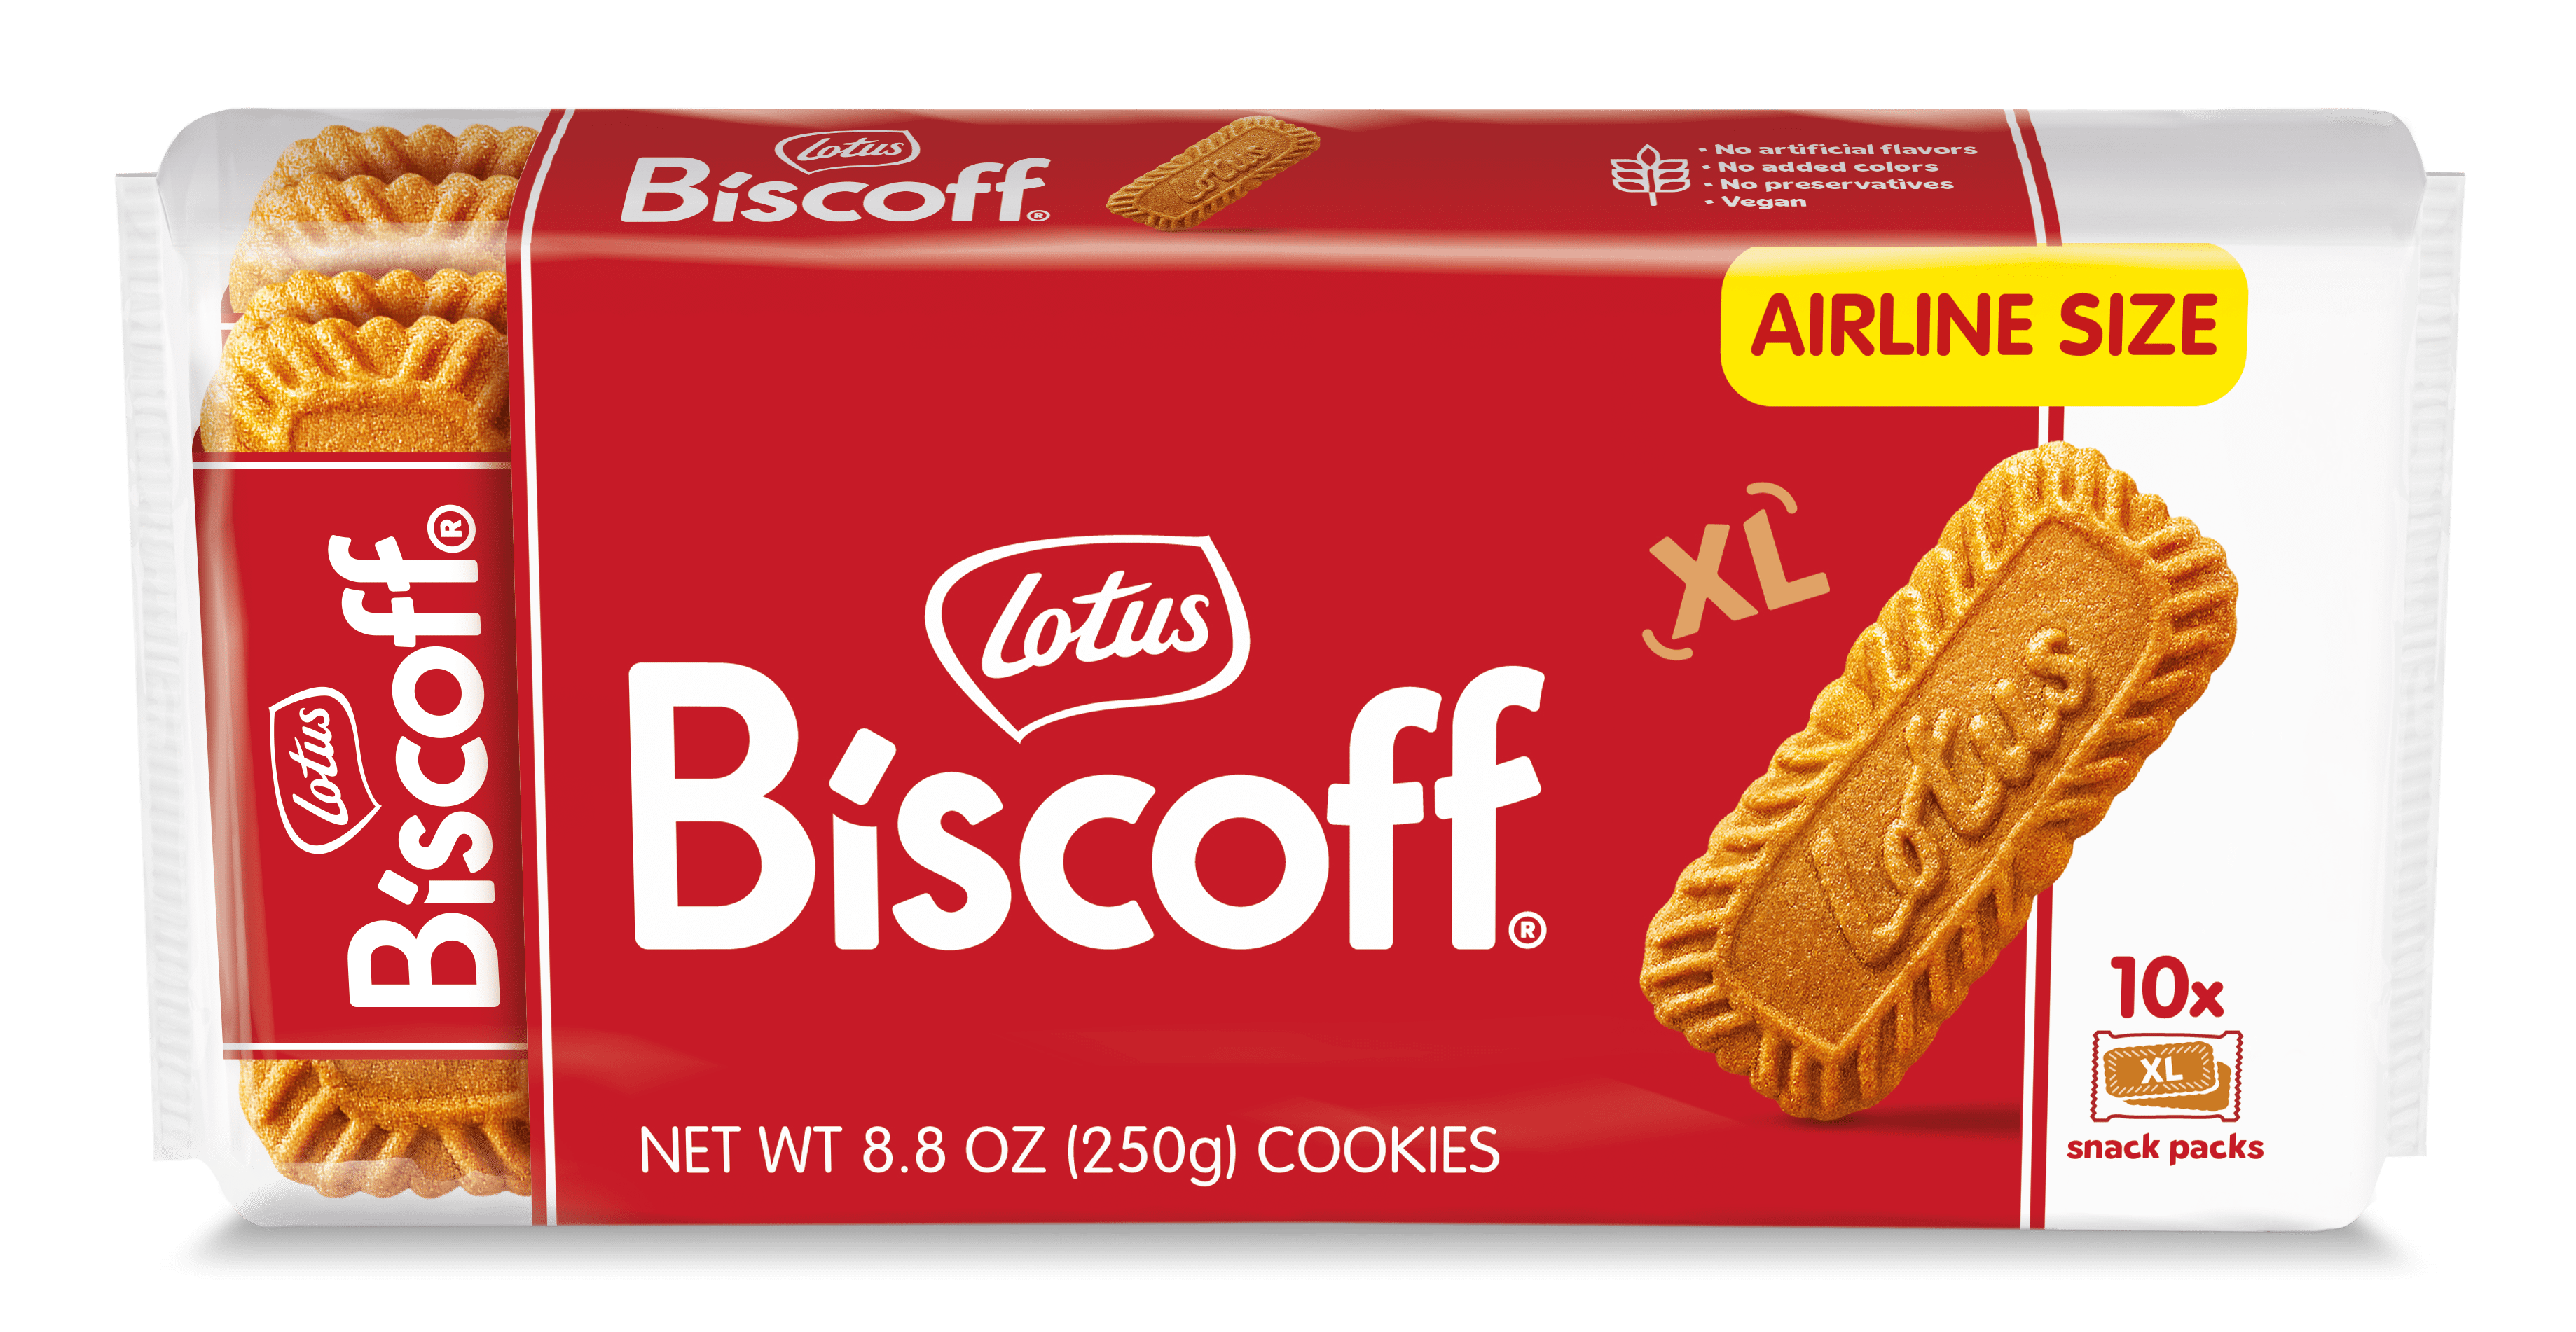 Everyone Loves Lotus Biscoff, And So Do We!